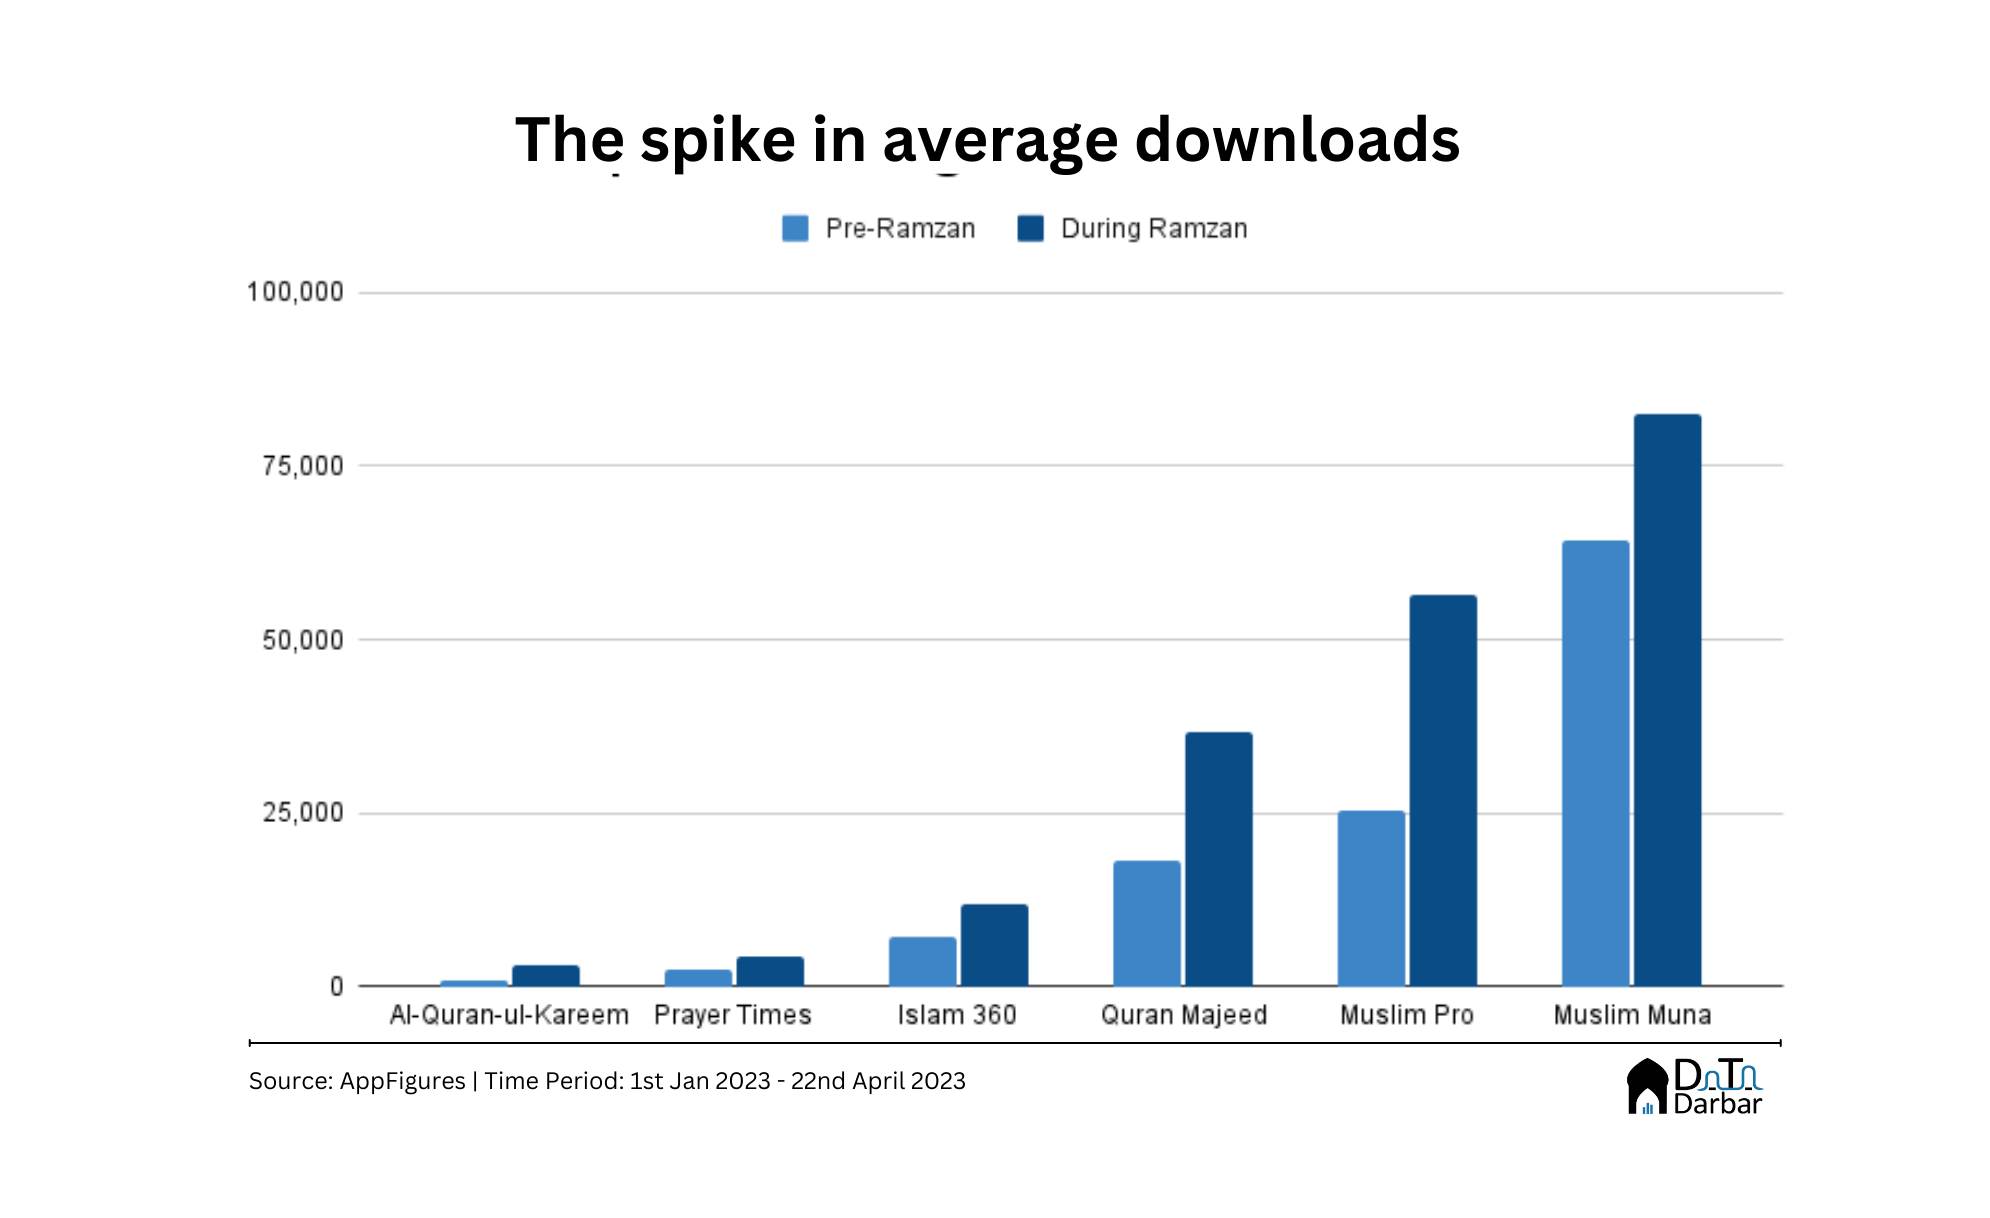 Ramzan Rush and the download spike in religious apps